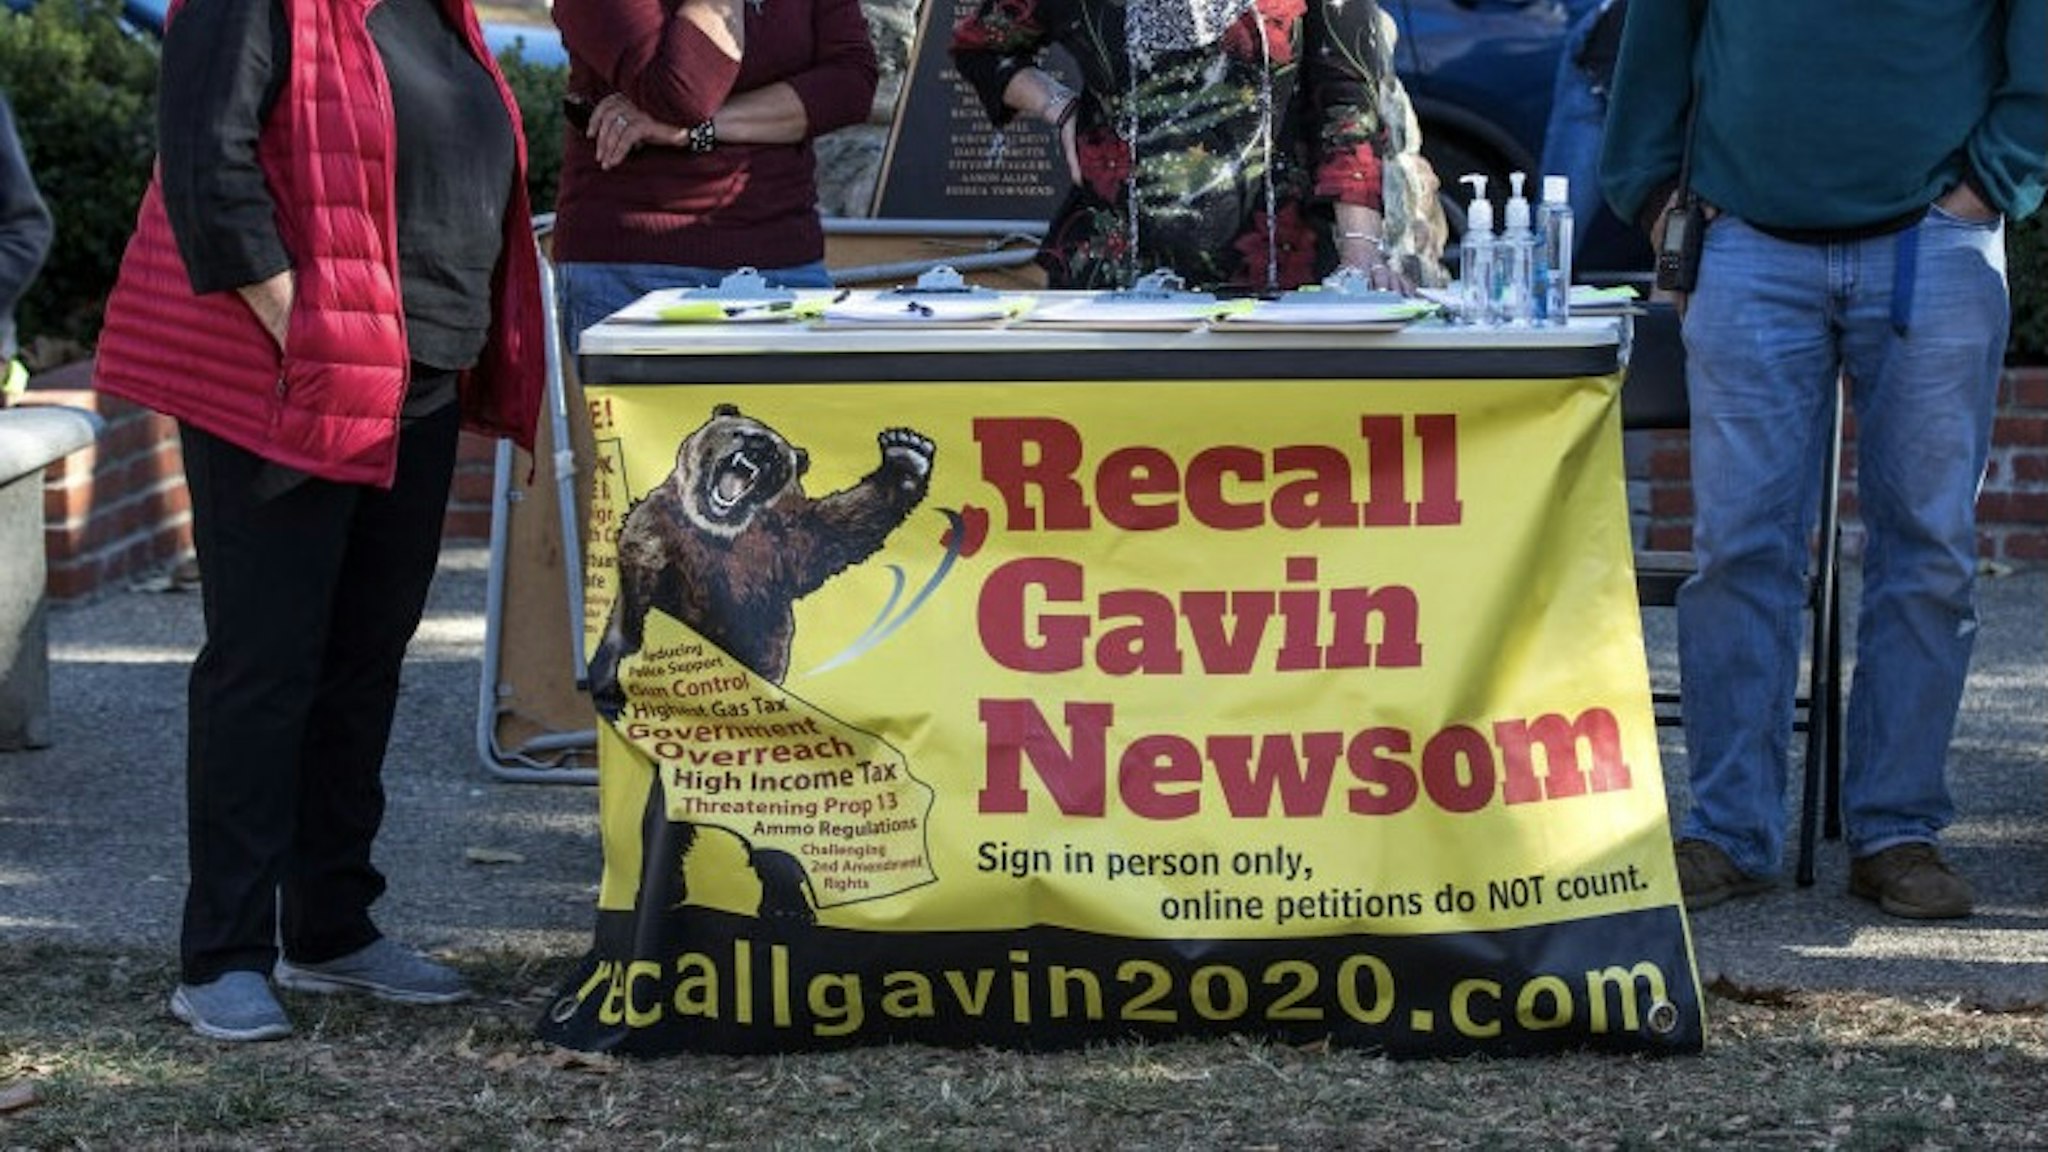 SOLVANG, CA - DECEMBER 20: People circulating a "Recall Gavin Newsom" petition listen to speakers decry a stolen election and demand the state open all businesses during an unsanctioned "Solvang MAGA Protest" in the park on December 20, 2020 in Solvang, California. Despite the rapidly rising surge of cases and deaths in California following Thanksgiving, tourists, primarily from Southern California and Los Angeles continue to be drawn to this Danish-themed Central Coast community each weekend. (Photo by George Rose/Getty Images)